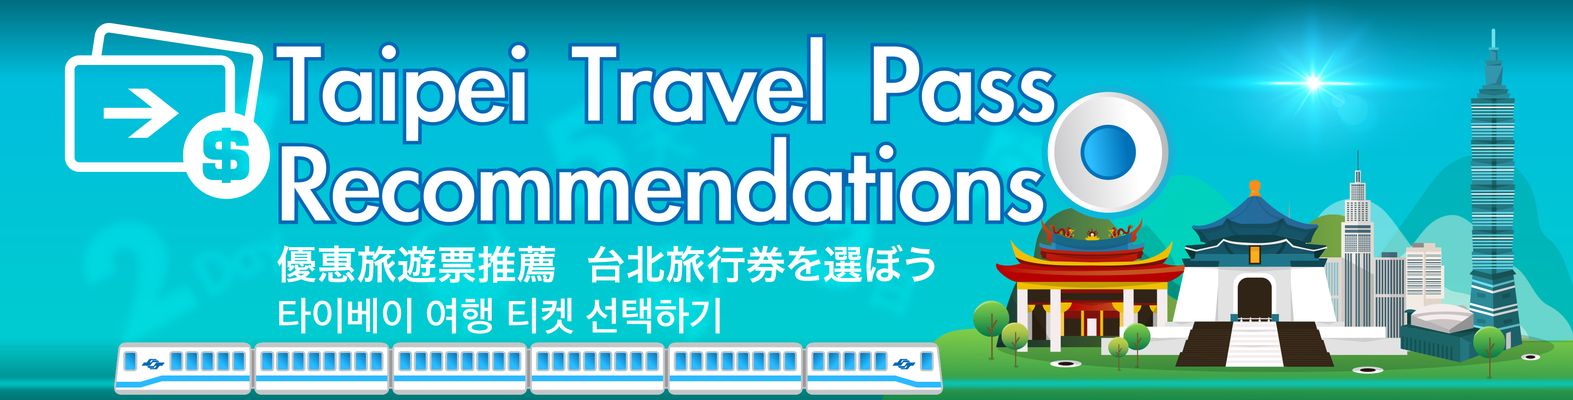 Travel Pass Recommendations